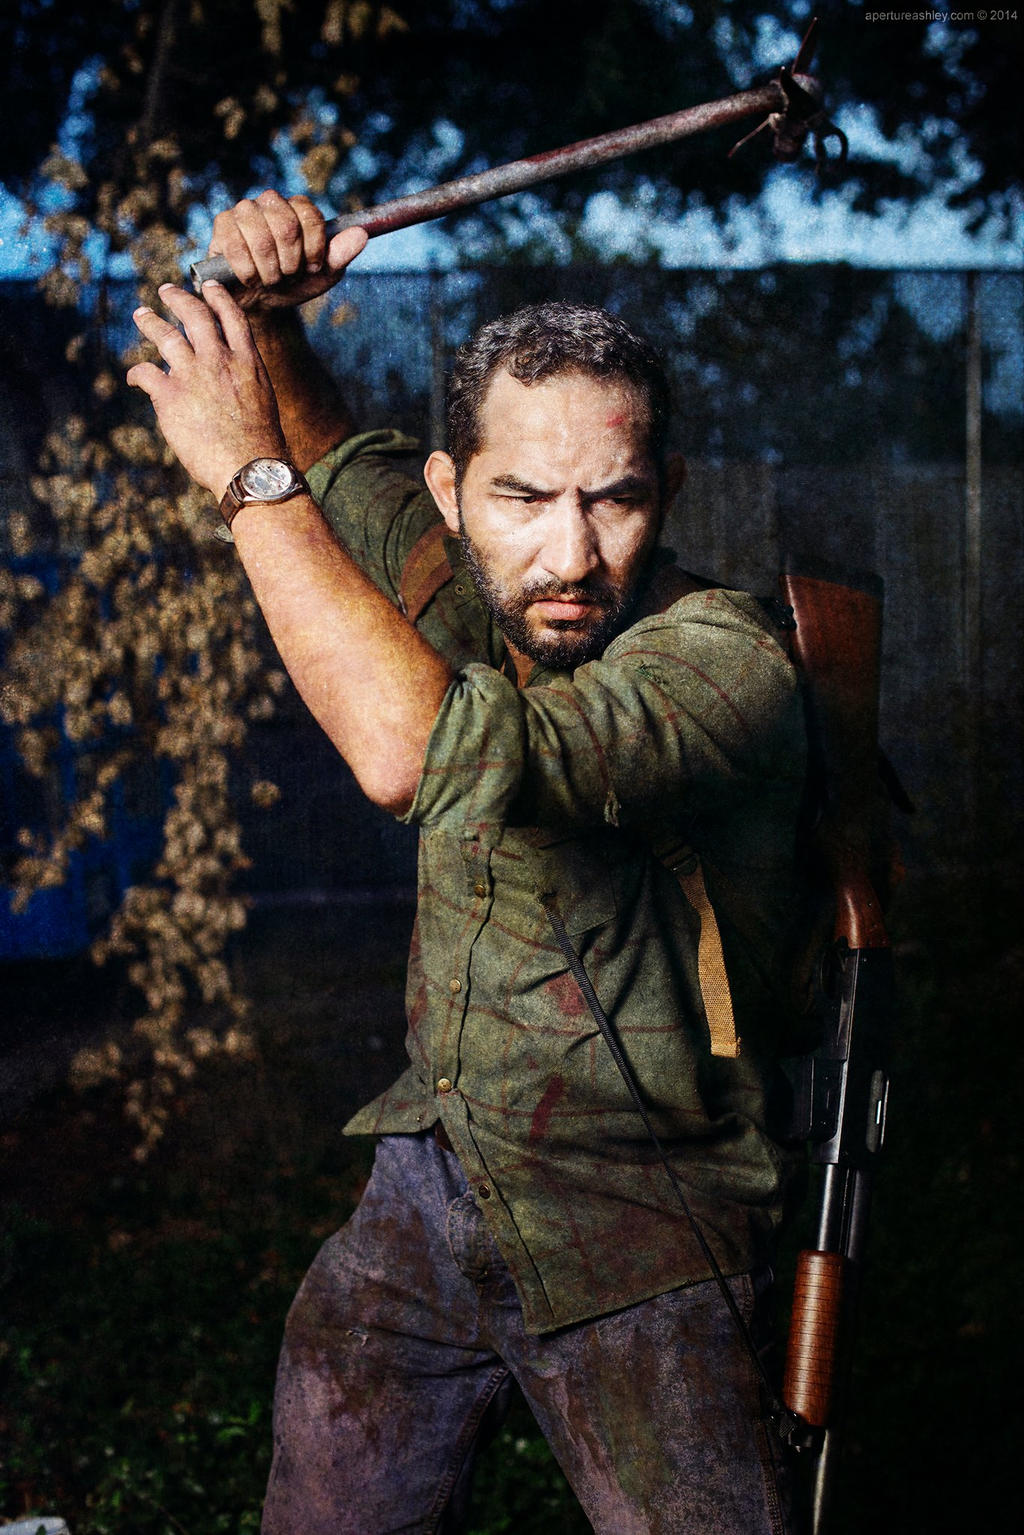 Joel - The Last of Us by PinkJusticeCosplay on DeviantArt